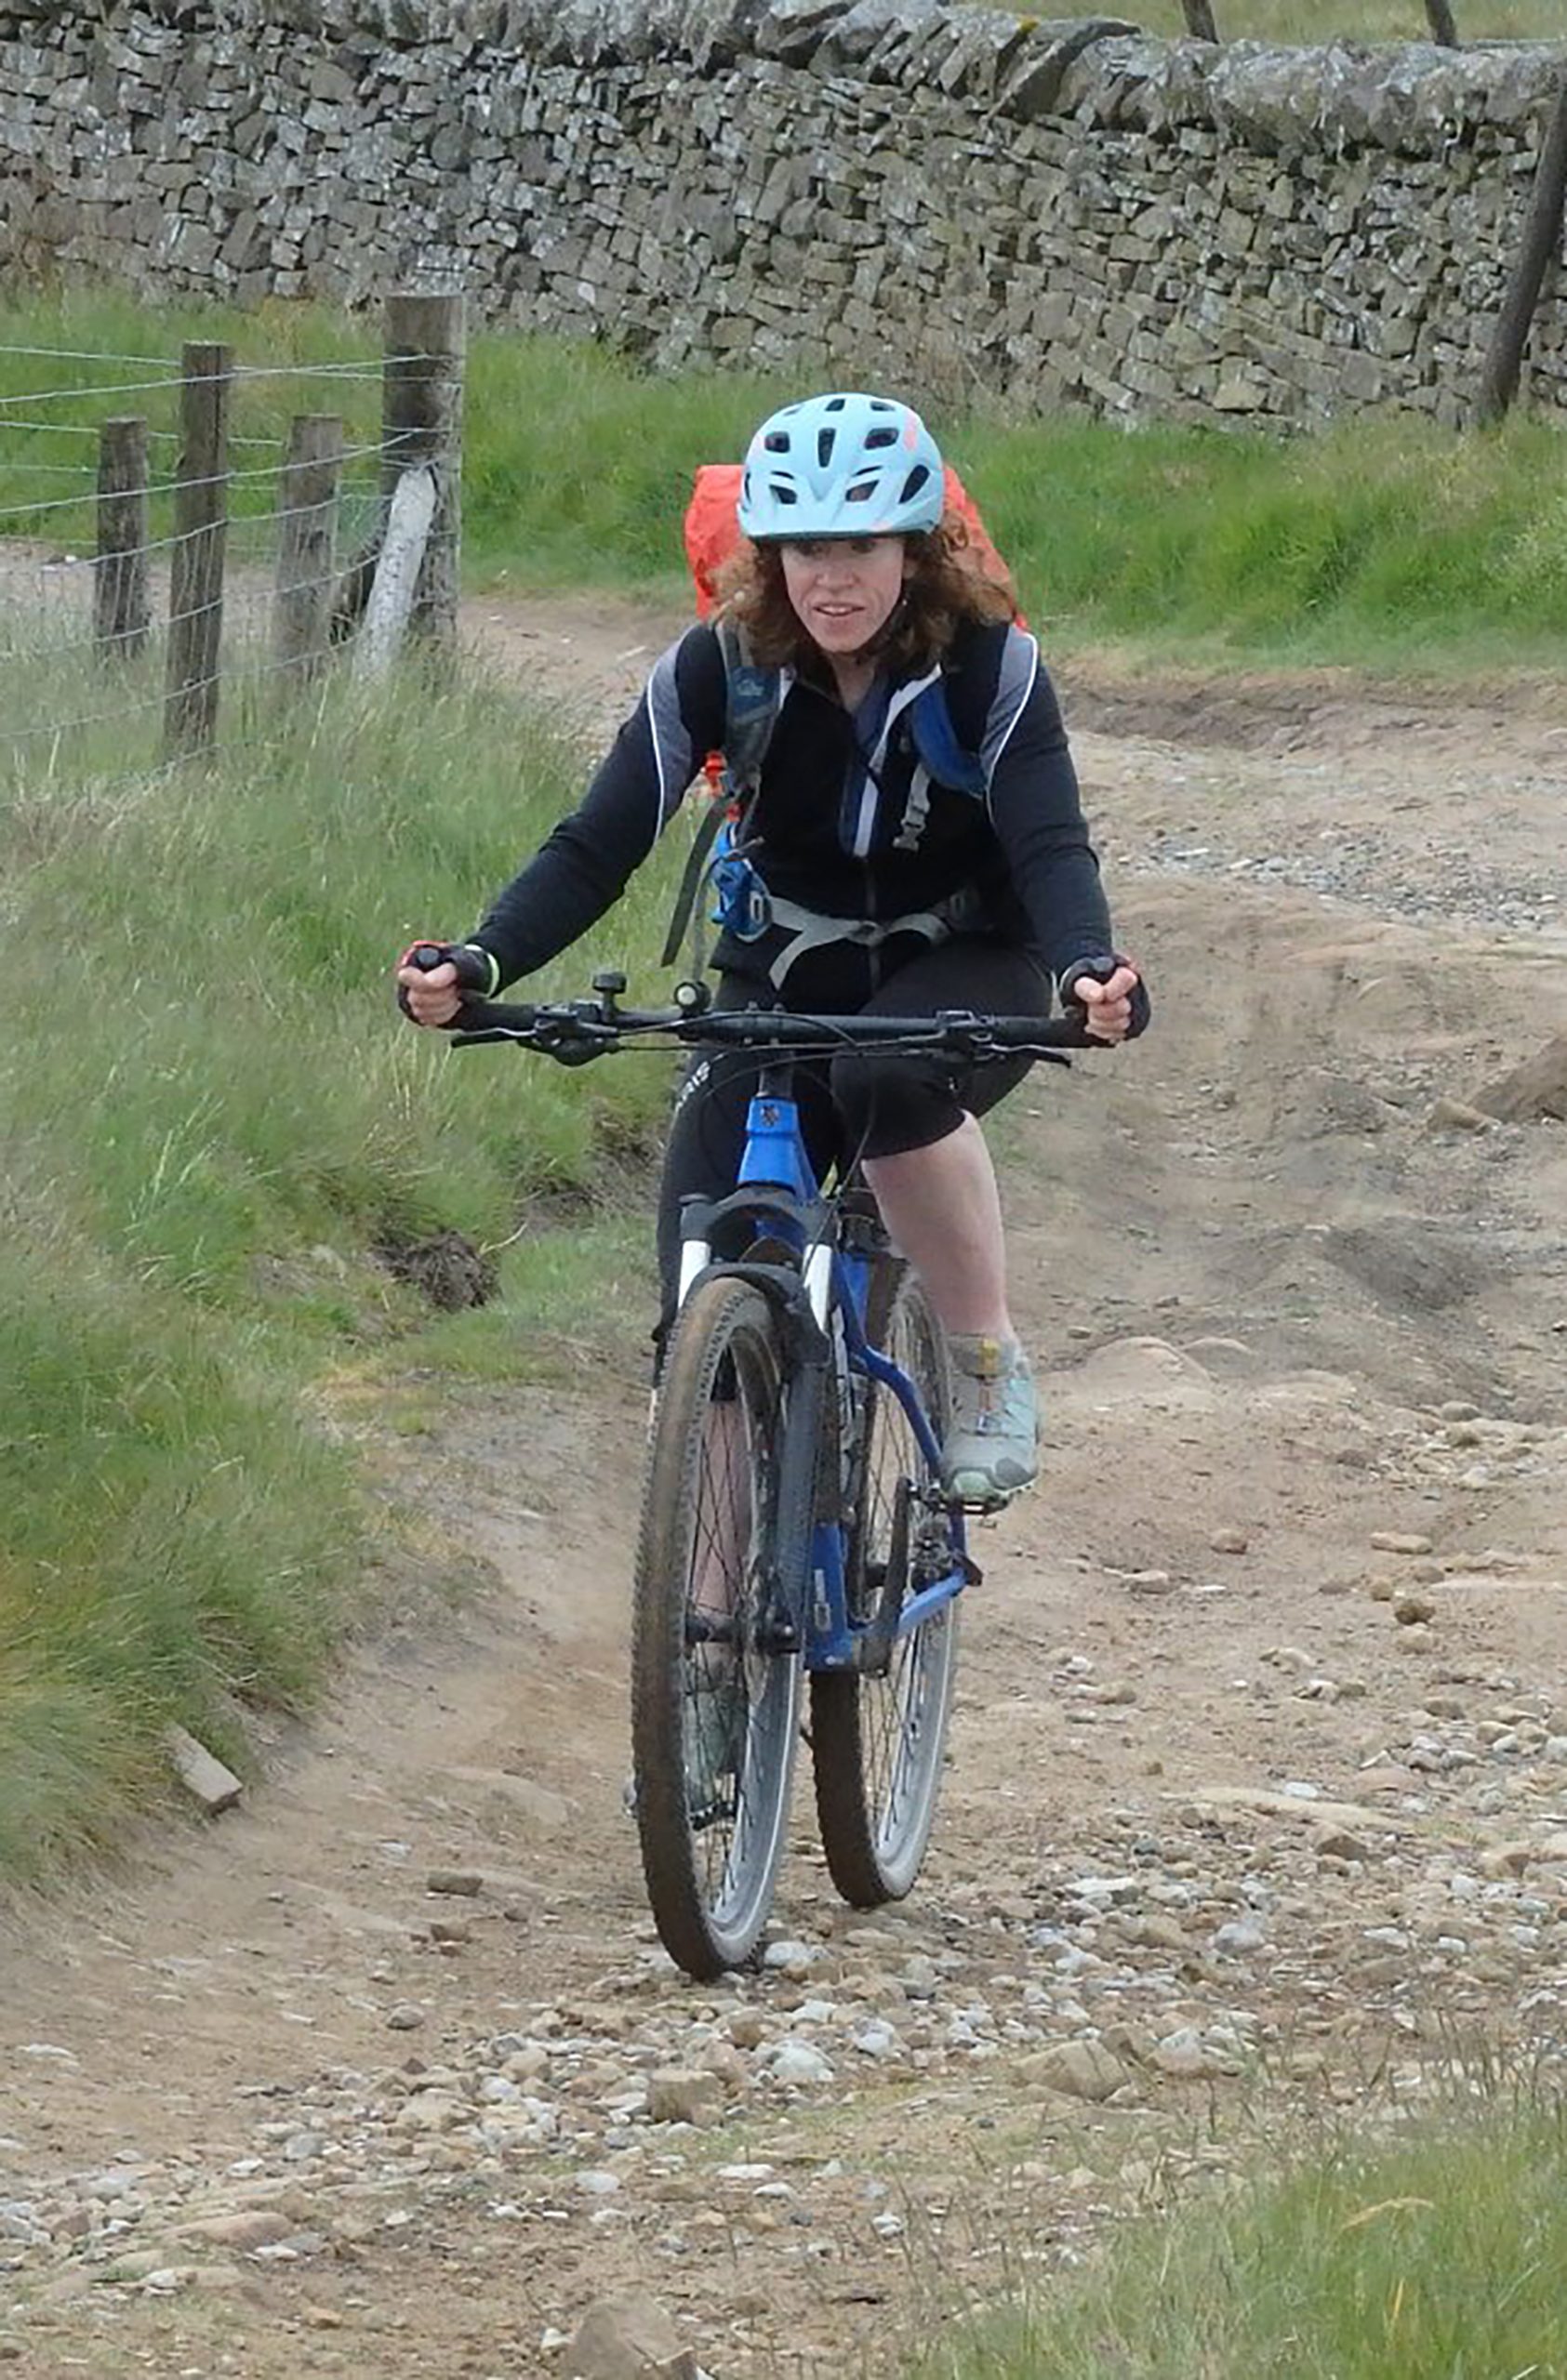 Carina Humberstone author of Scenic Cycling in the Peak District